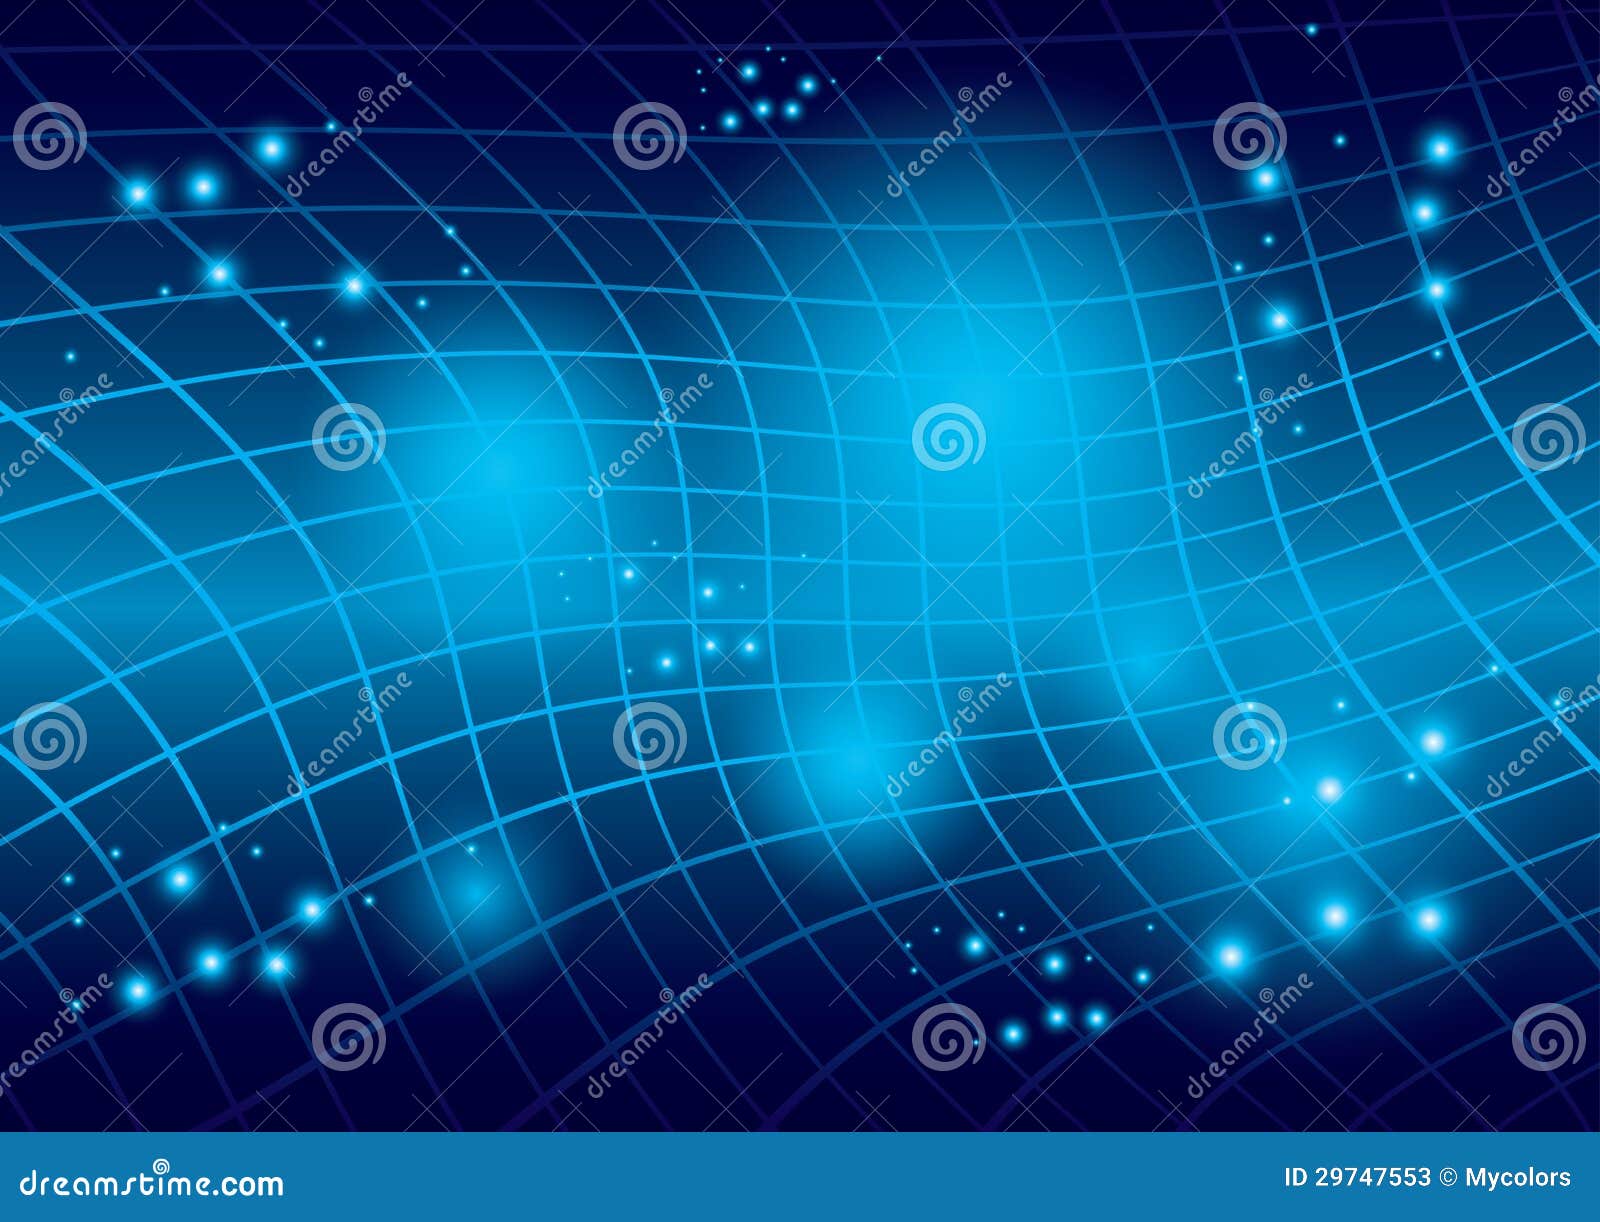 abstract blue warped background - 